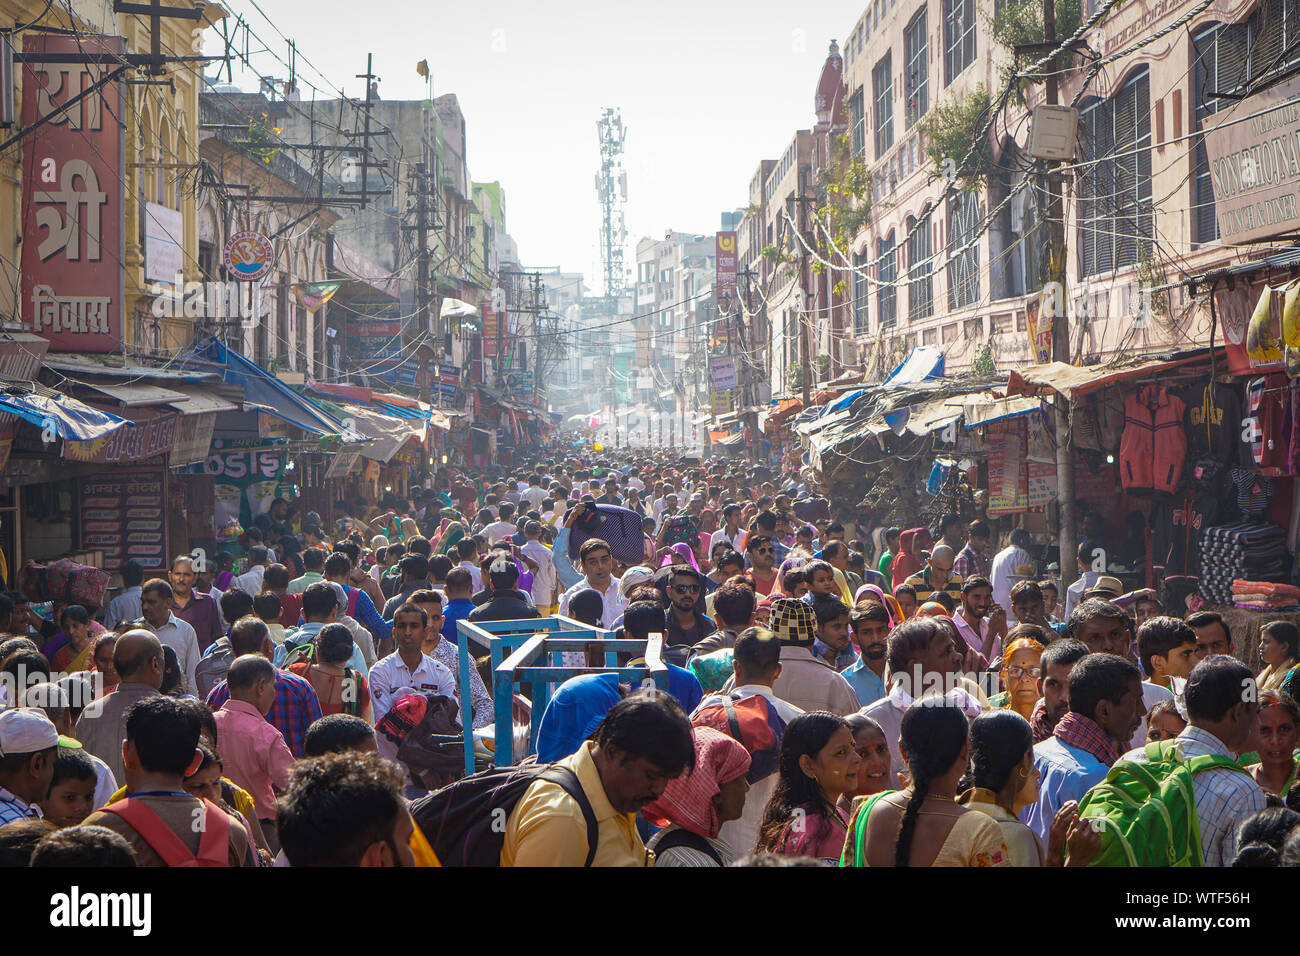 Crowded, busy Indian street Stock Photo